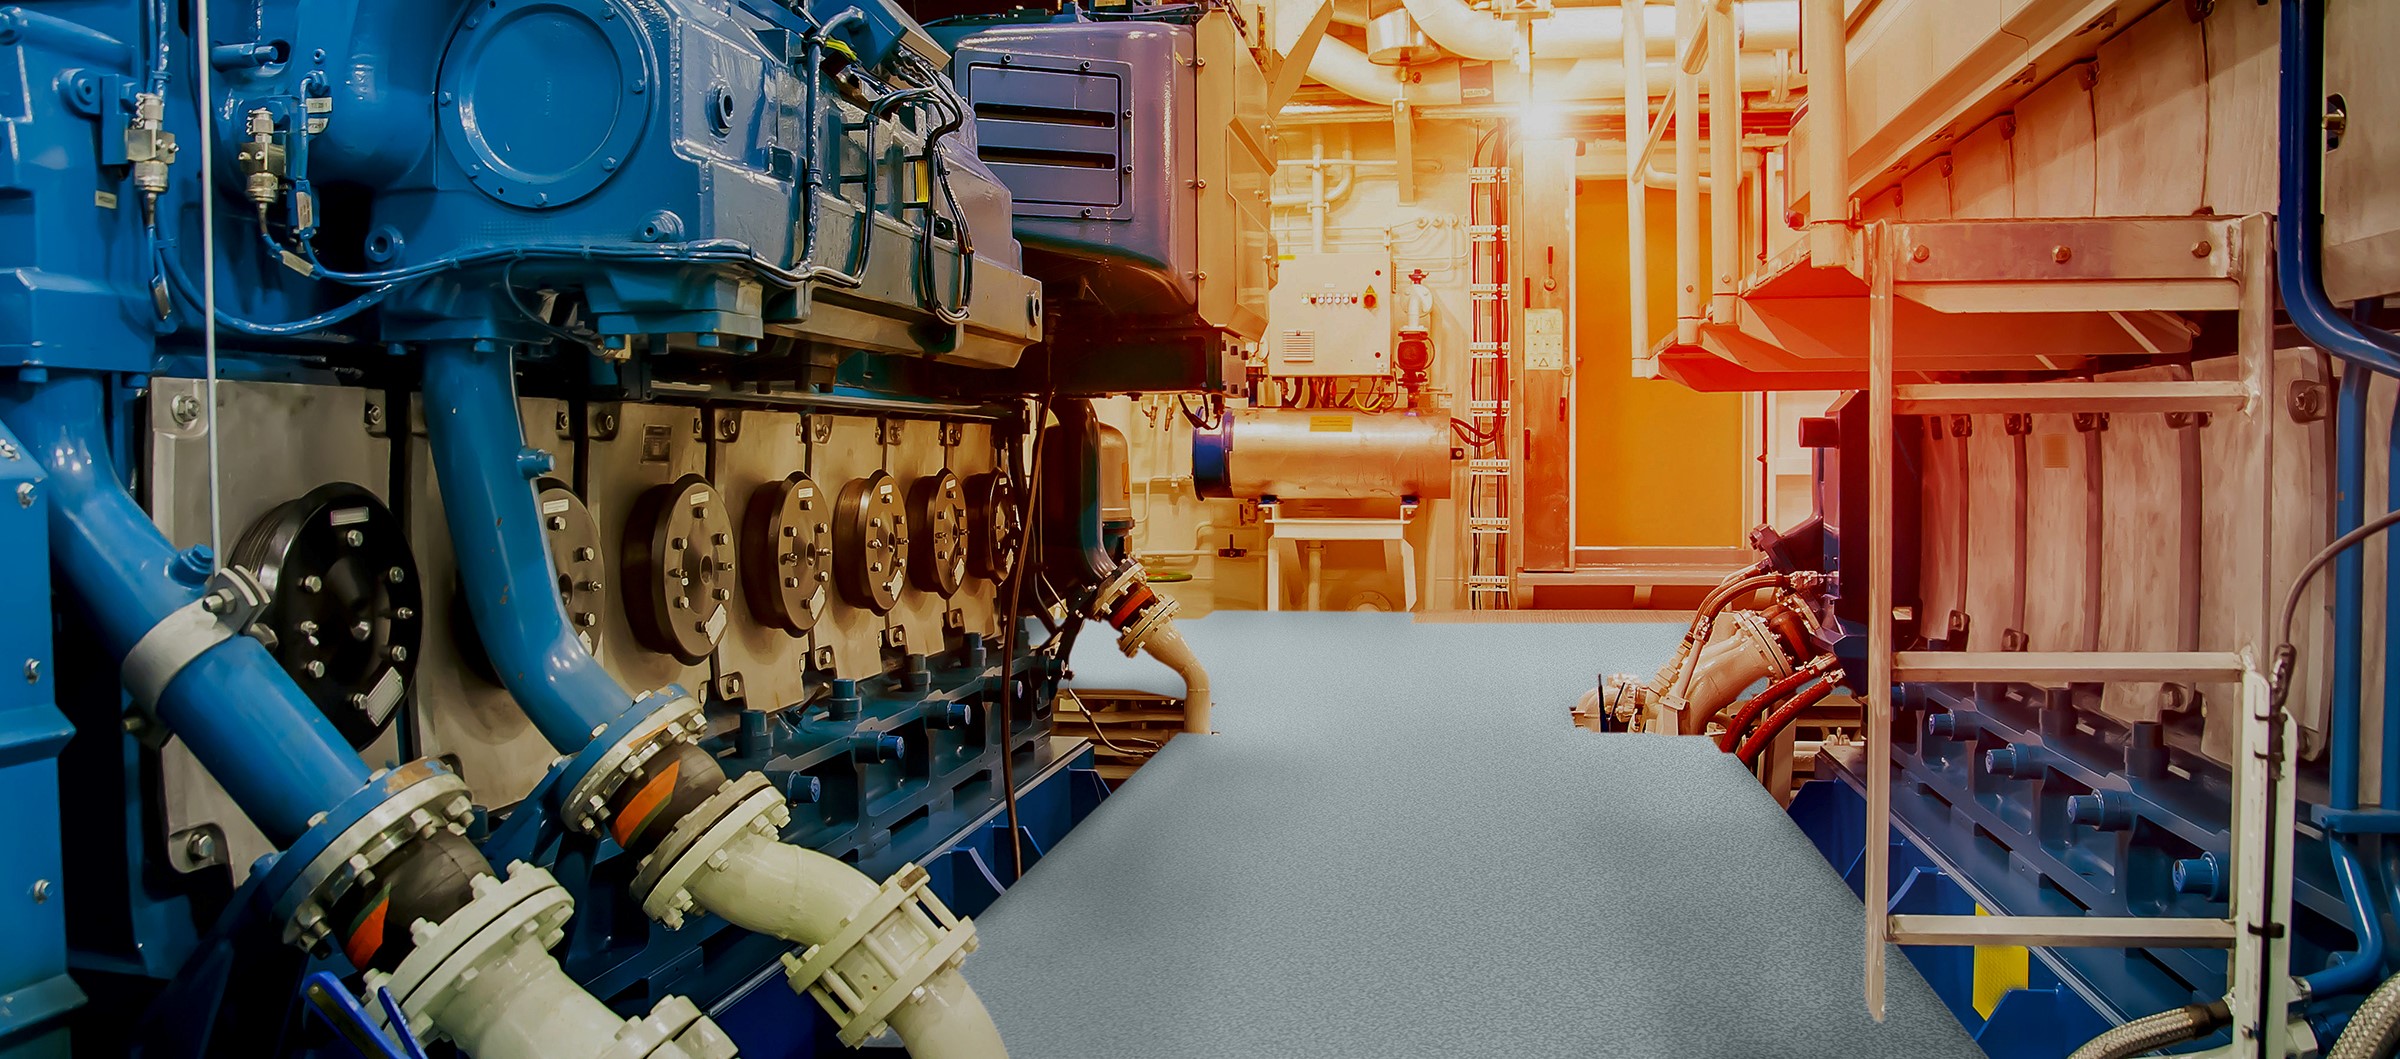 FLEXCO® Introduces the Only IMO Rubber Flooring Certified by The U.S. Coast Guard